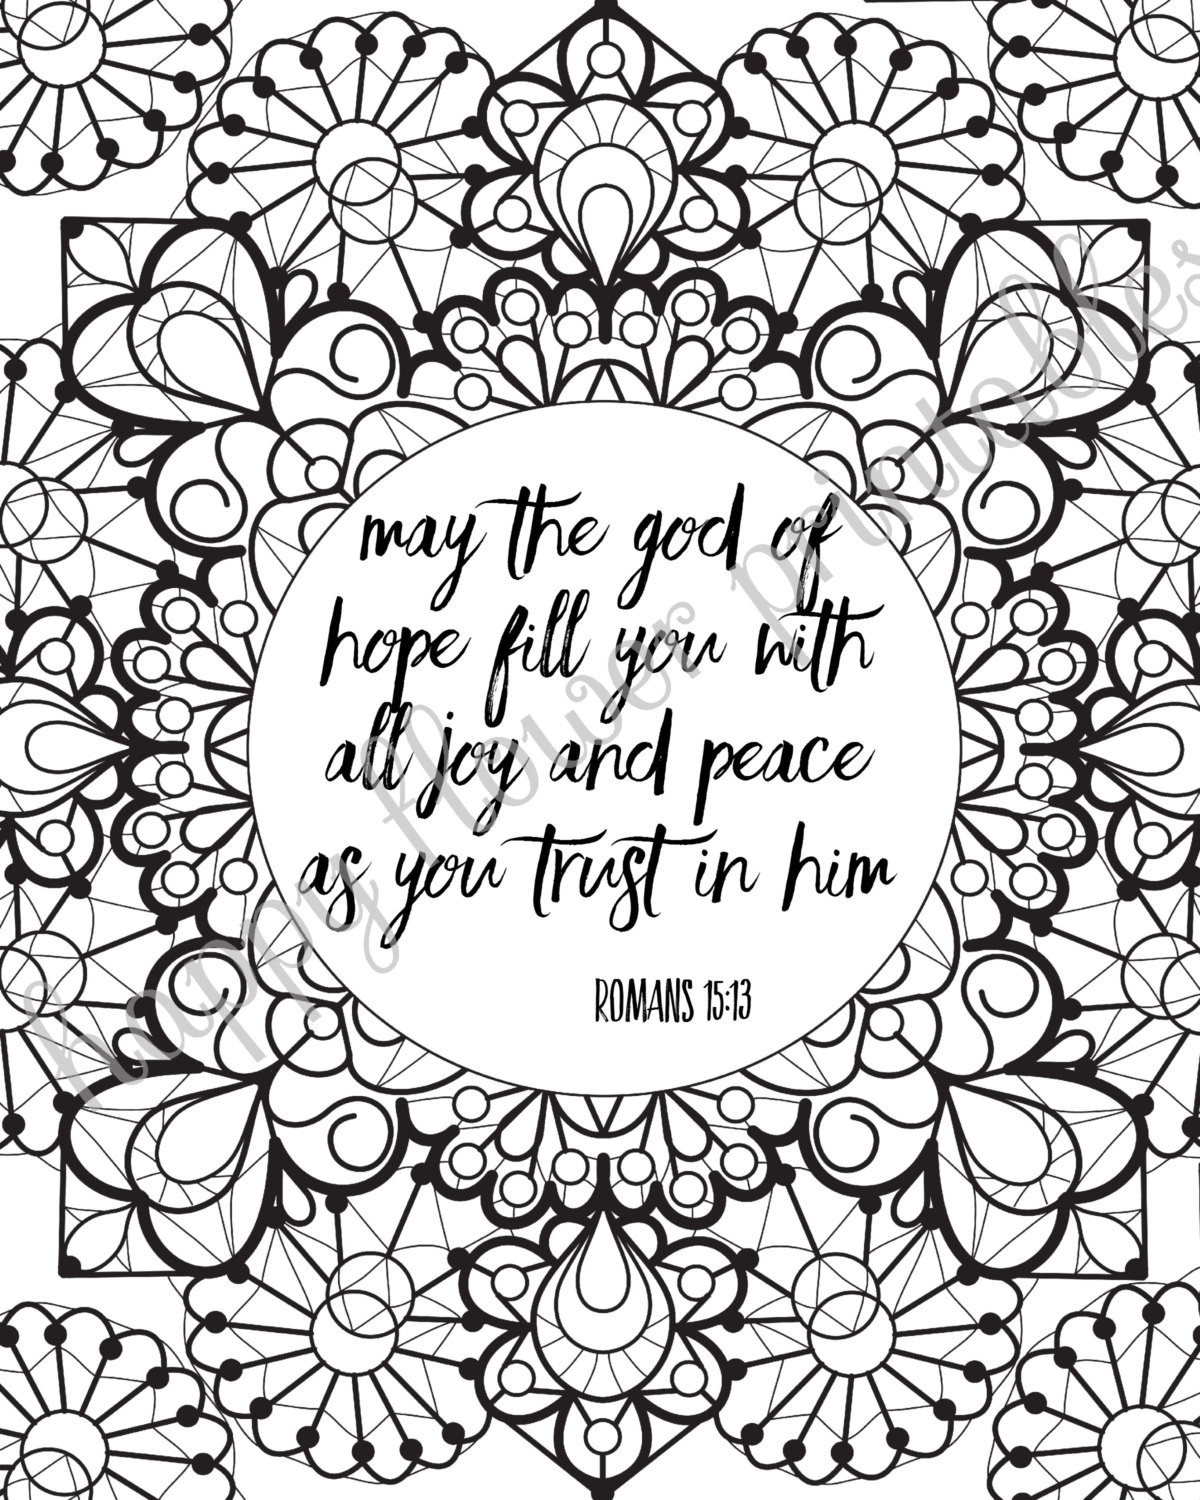 Free Printable Bible Verse Coloring Pages
 12 Bible Verse Coloring Pages Instant Download Value Bundle